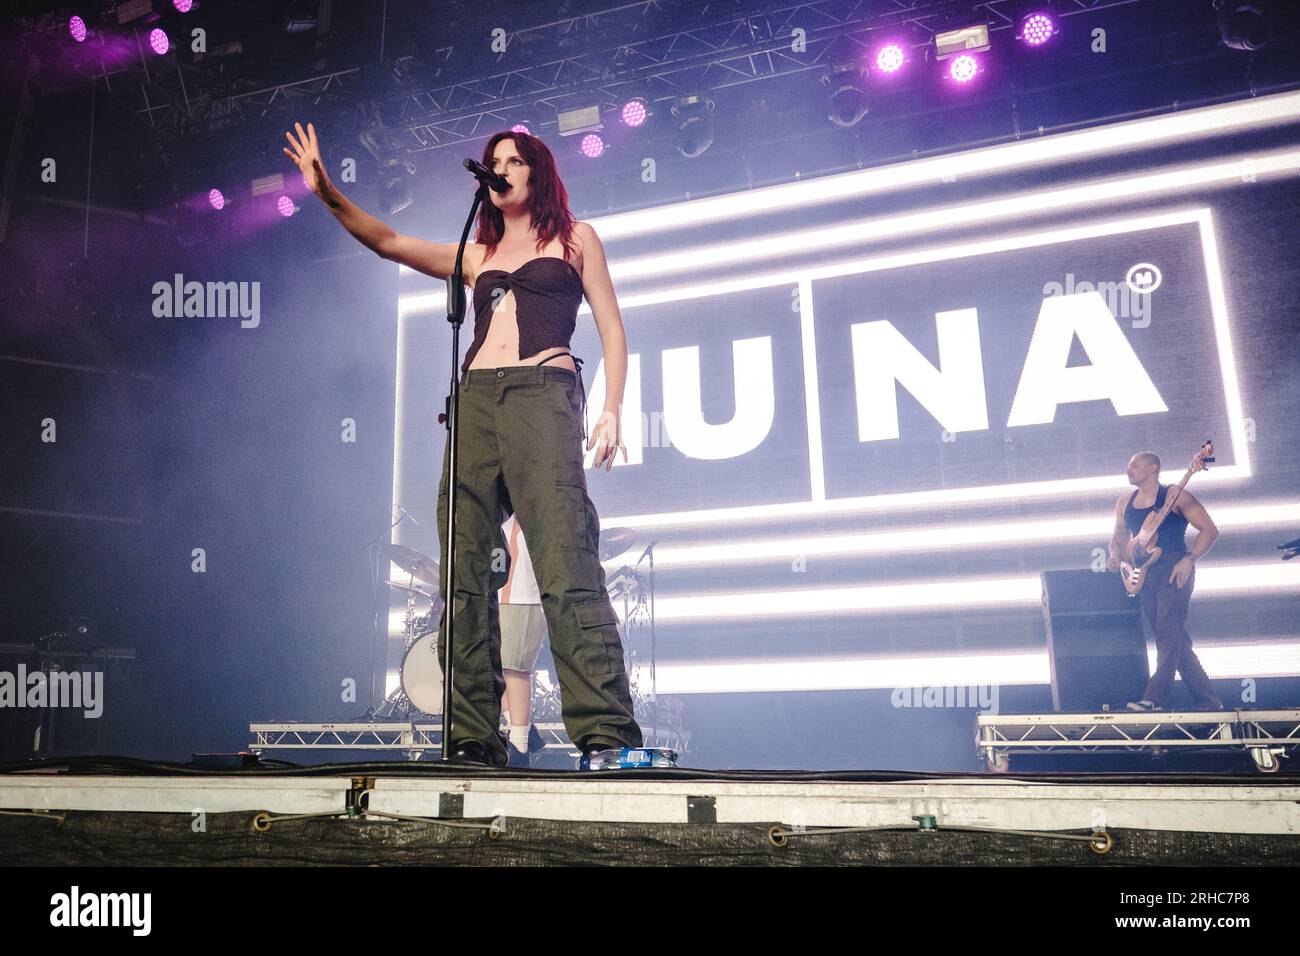 Gothenburg, Sweden. 12th, August 2023. The American indie pop band Muna performs a live concert during the Swedish music festival Way Out West 2023 in Gothenburg. Here singer Katie Gavin is seen live on stage. (Photo credit: Gonzales Photo - Tilman Jentzsch). Stock Photo